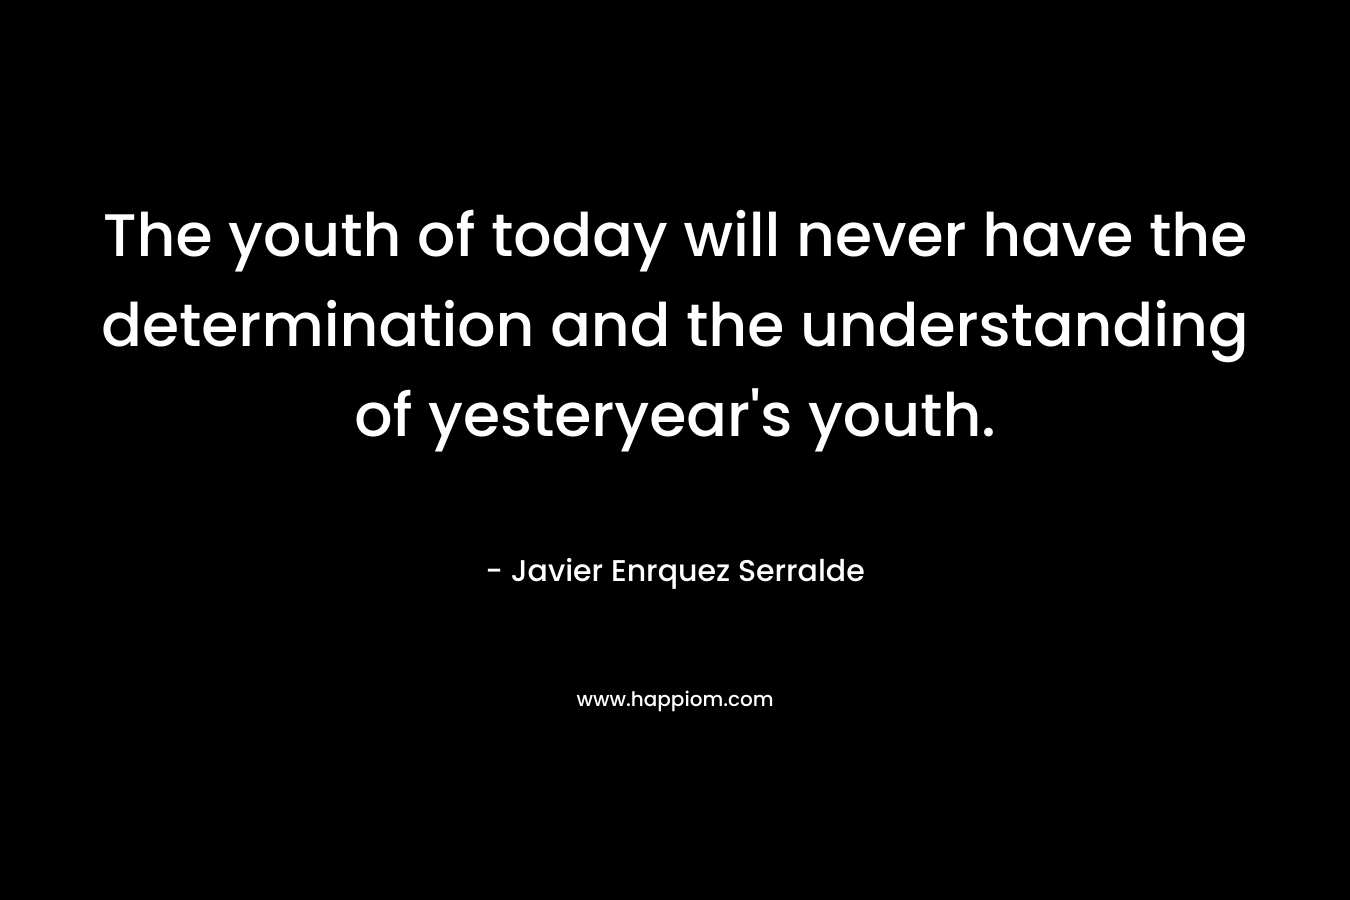 The youth of today will never have the determination and the understanding of yesteryear's youth.